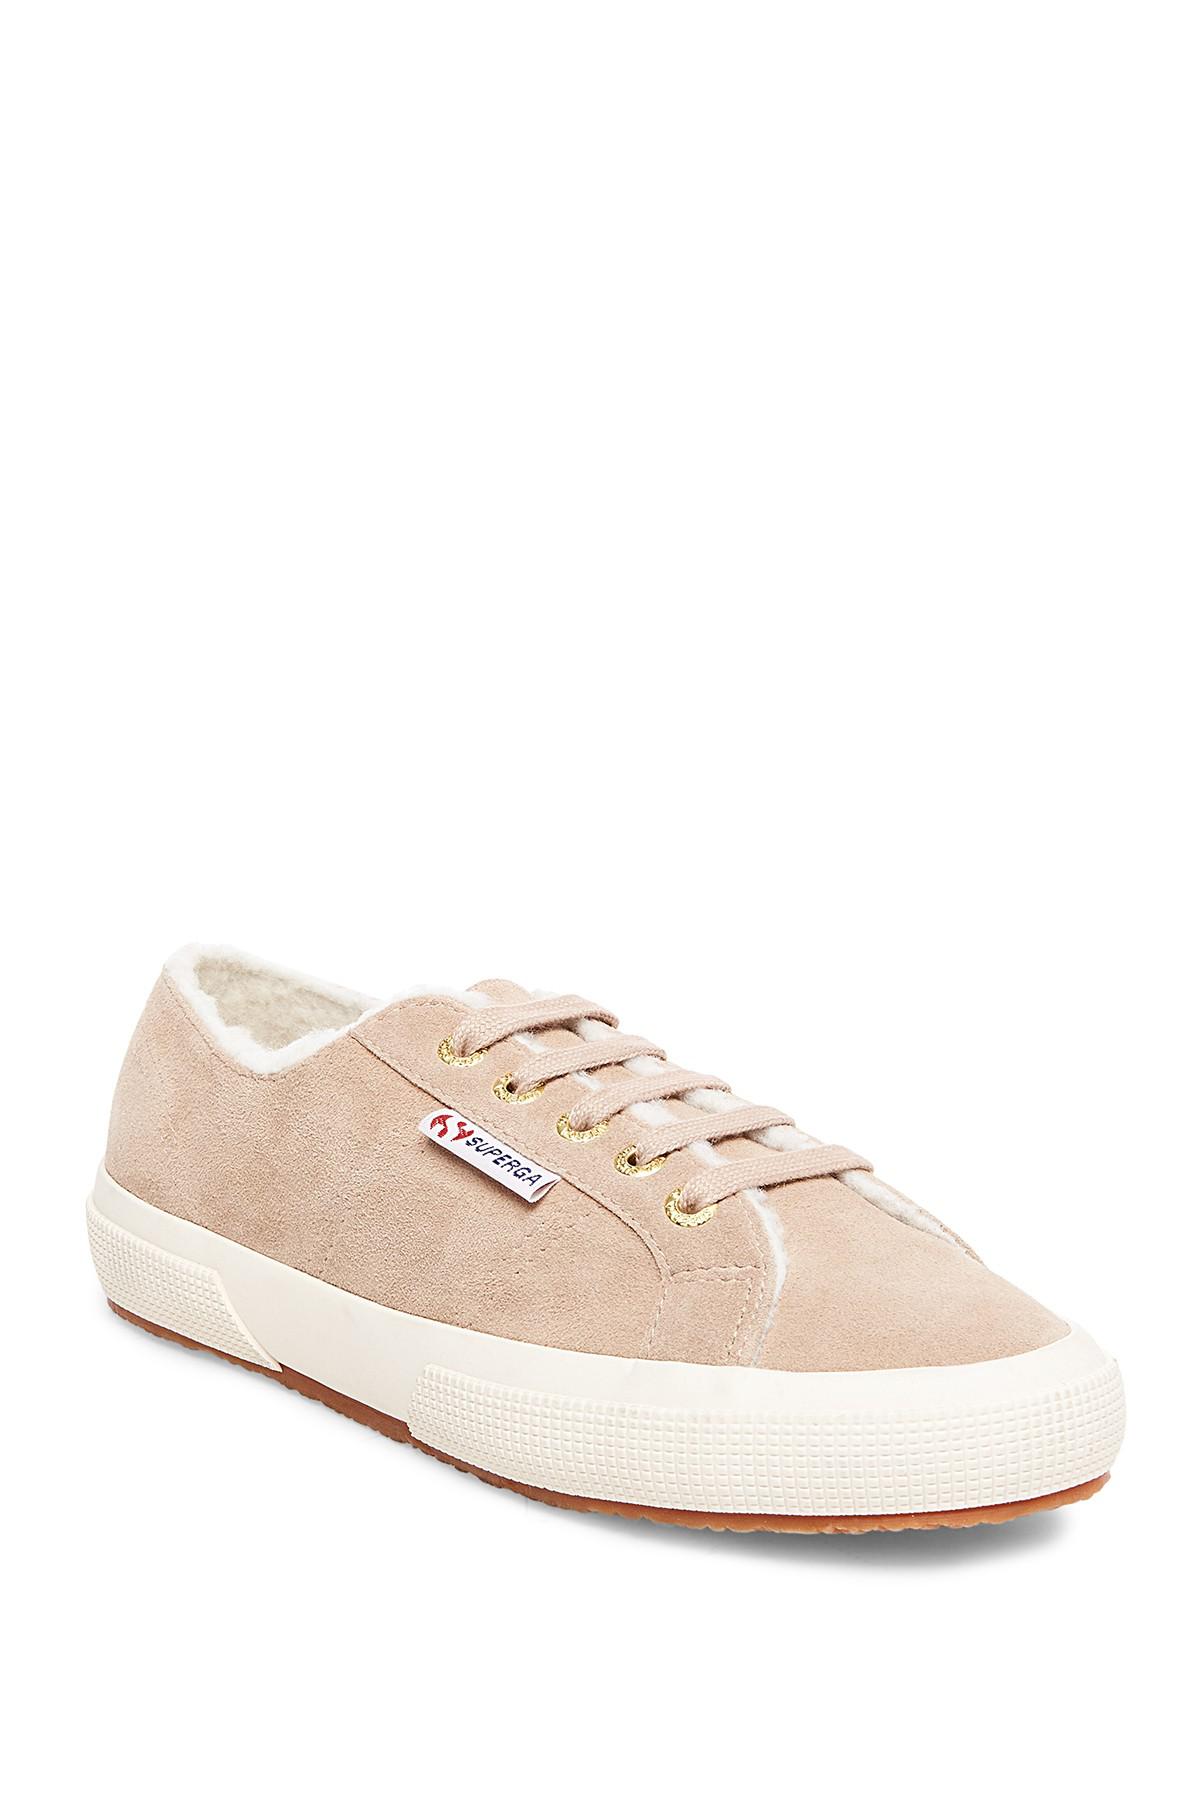 superga sherpa lined sneakers